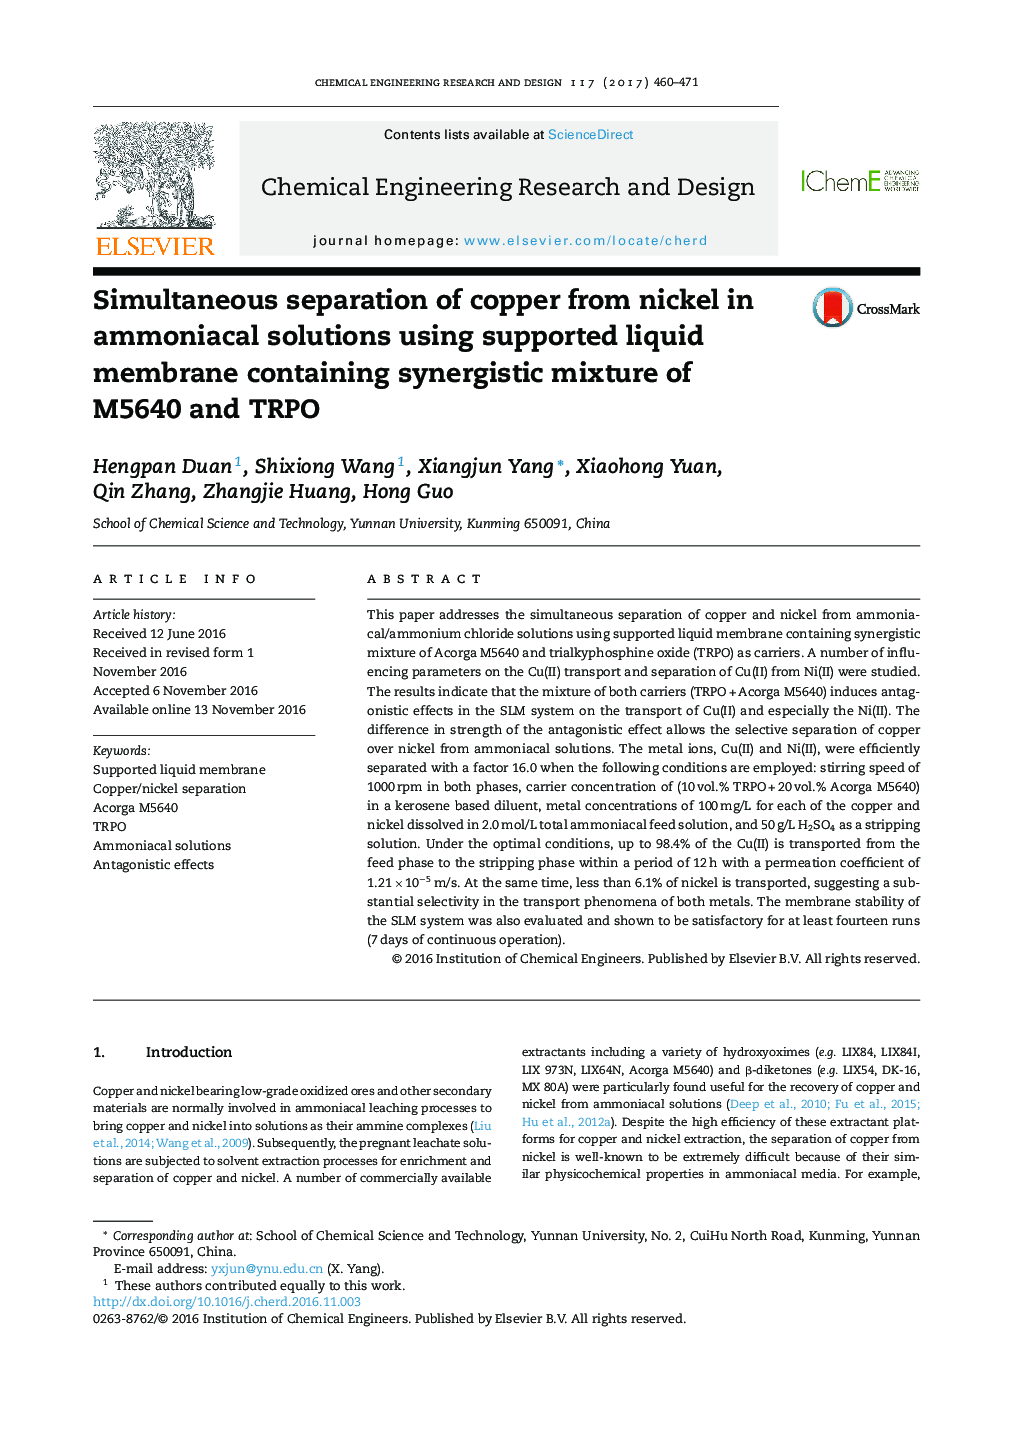 Simultaneous separation of copper from nickel in ammoniacal solutions using supported liquid membrane containing synergistic mixture of M5640 and TRPO